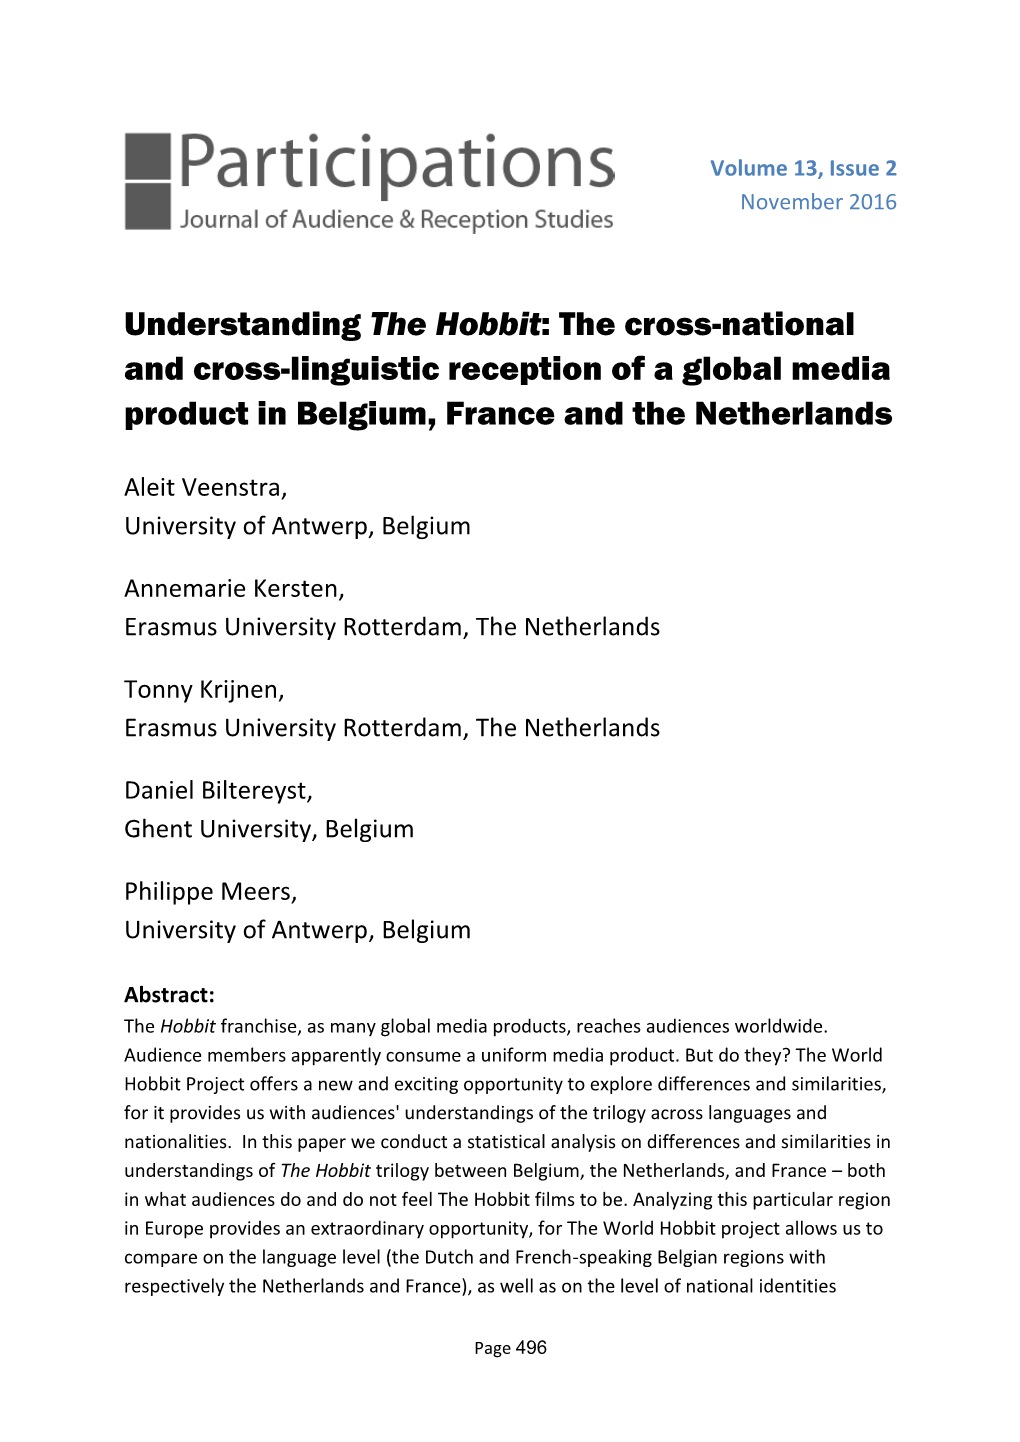 Understanding the Hobbit: the Cross-National and Cross-Linguistic Reception of a Global Media Product in Belgium, France and the Netherlands